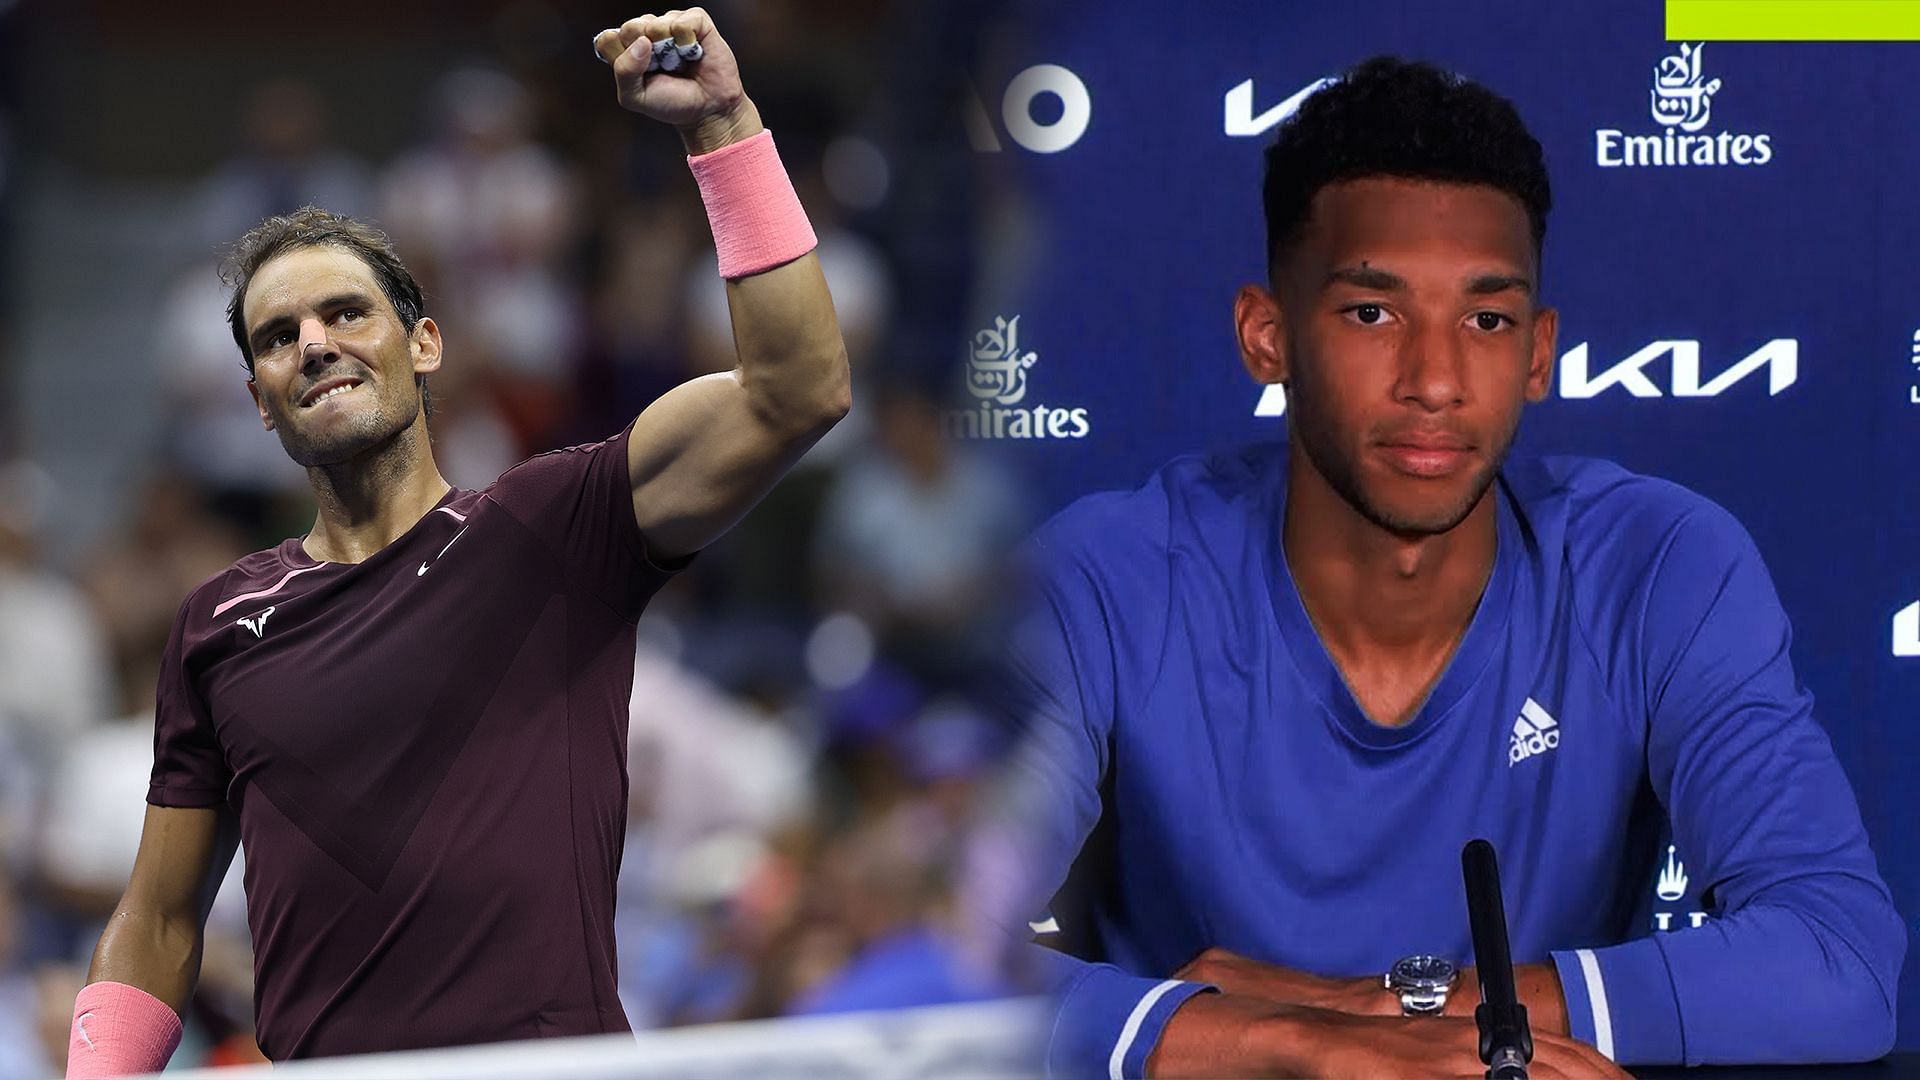 Rafael Nadal defeated Felix Auger-Aliassime at the 2022 French Open.